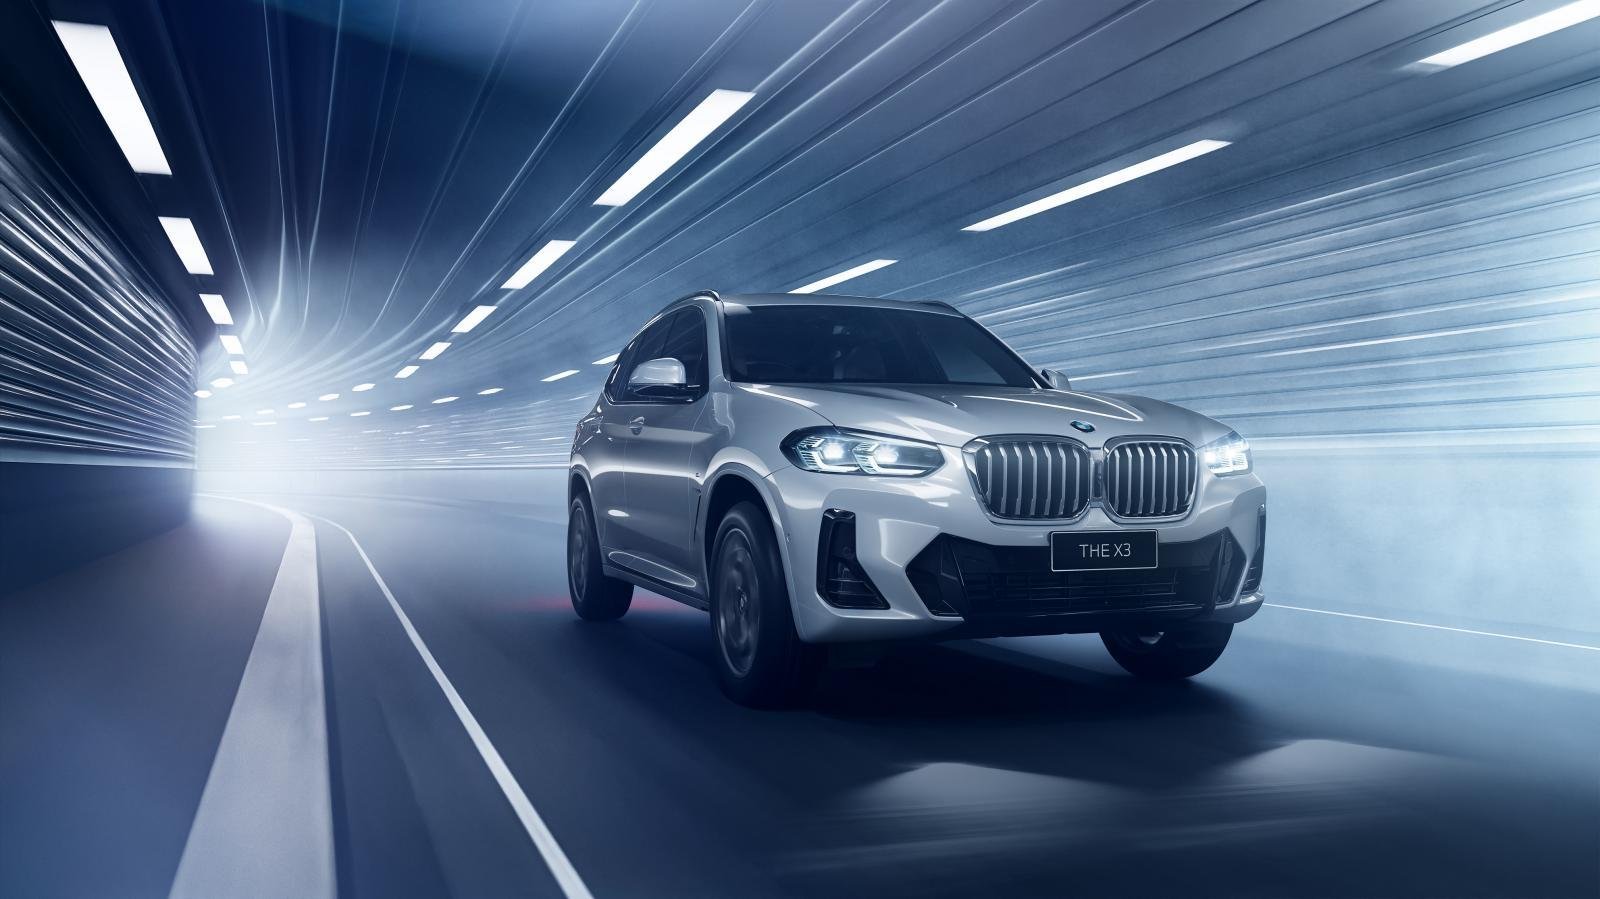 New BMW X3 Launched in India, Prices Start at Rs 59.90 Lakh